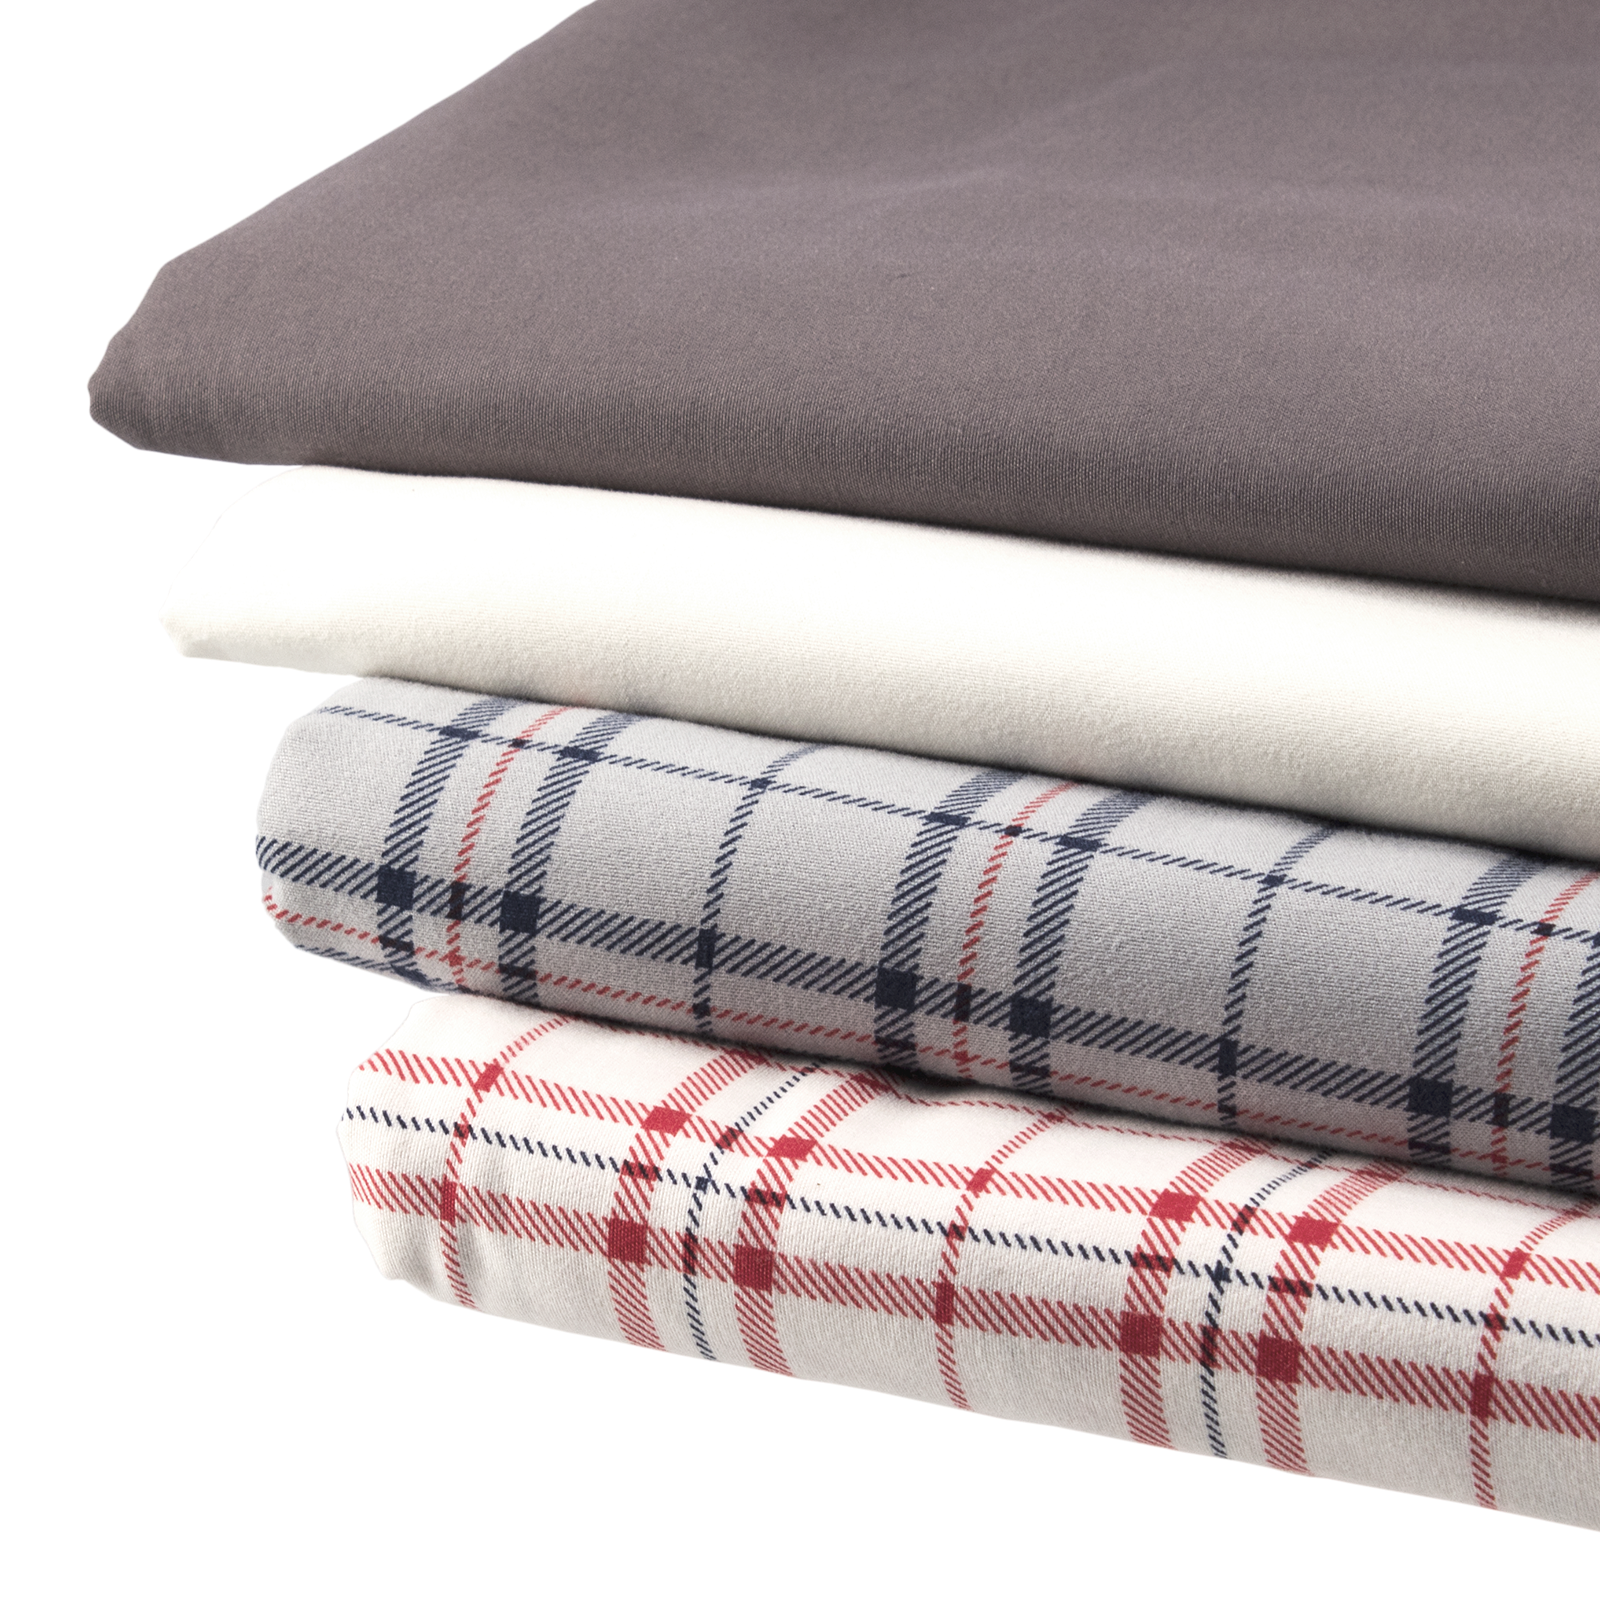 Today only: Micro-flannel sheet sets from $21 shipped